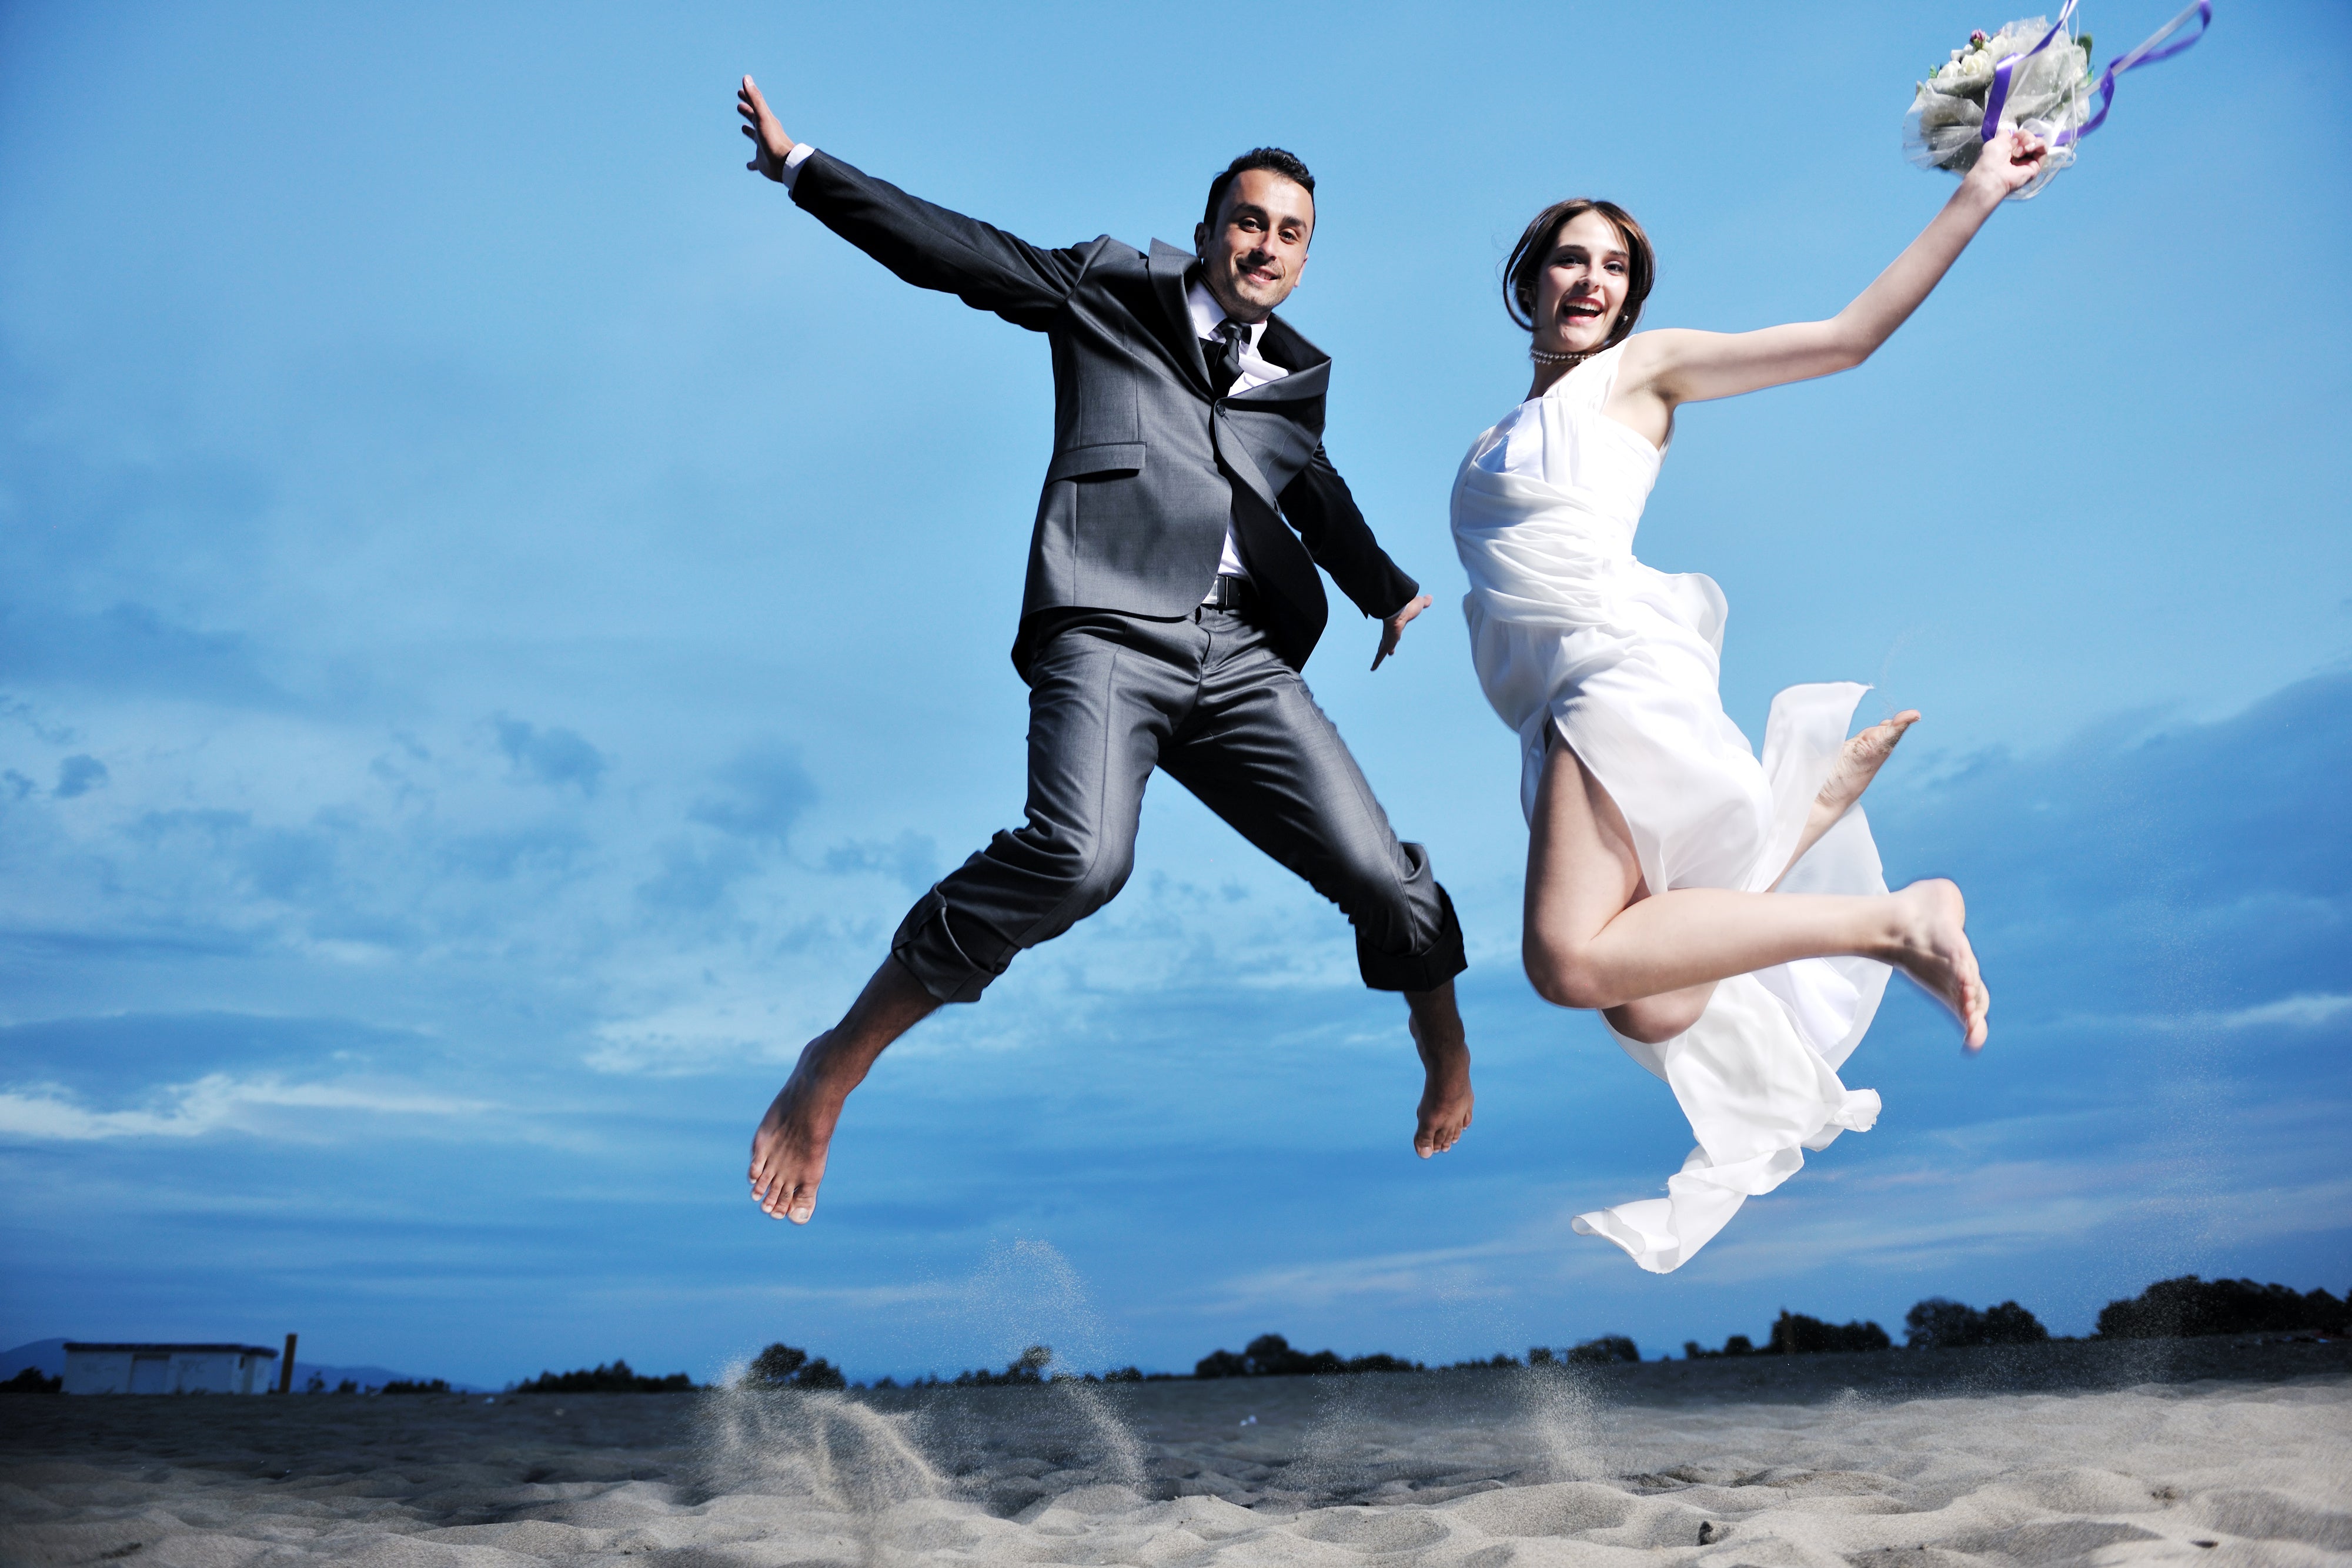 15 FUN WEDDING PHOTOGRAPHY Poses to inspire you. - YouTube